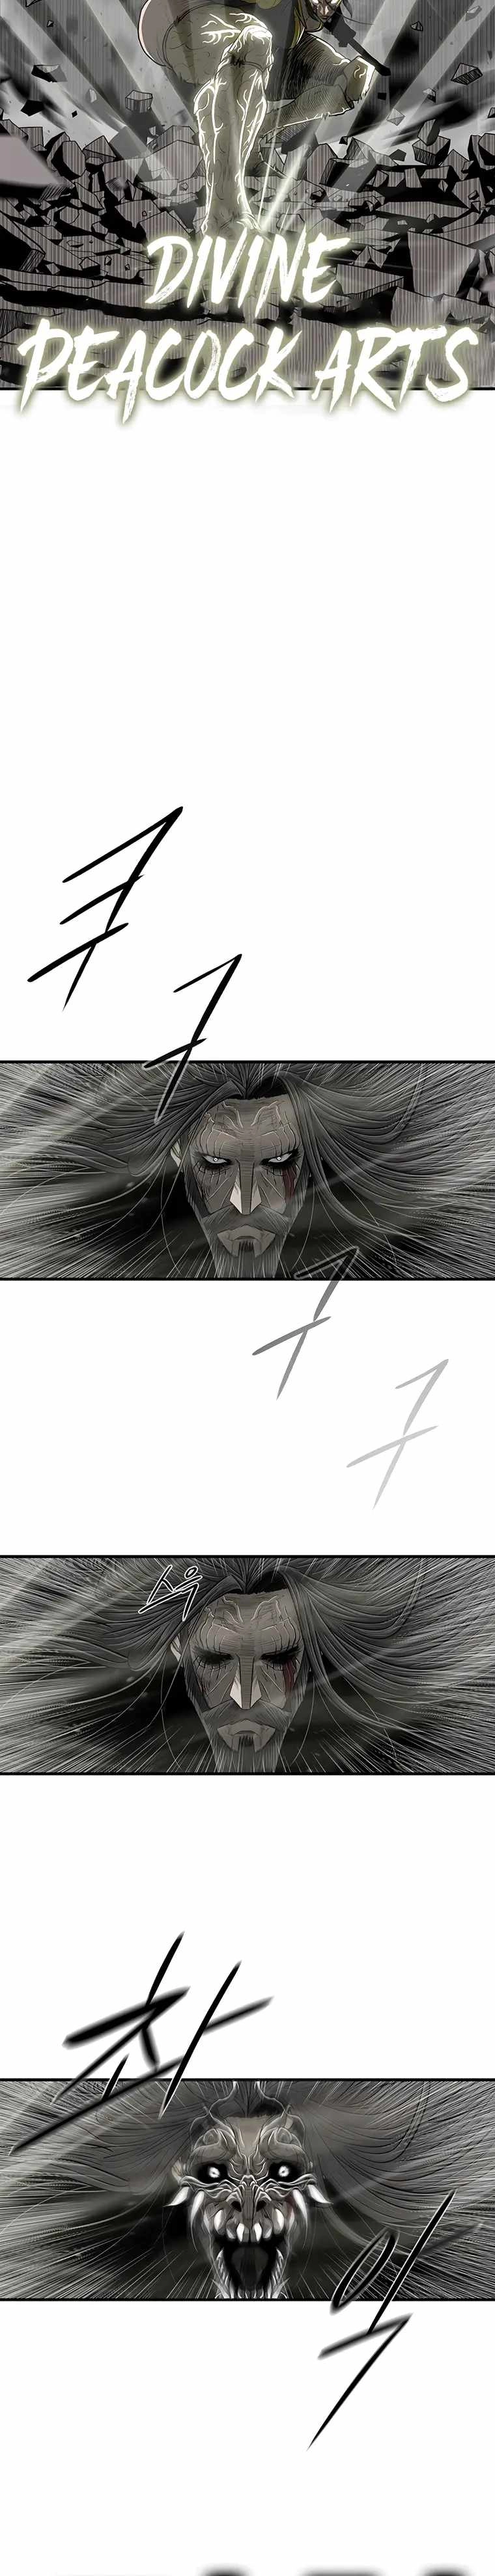 Legend of the Northern Blade Chapter 163